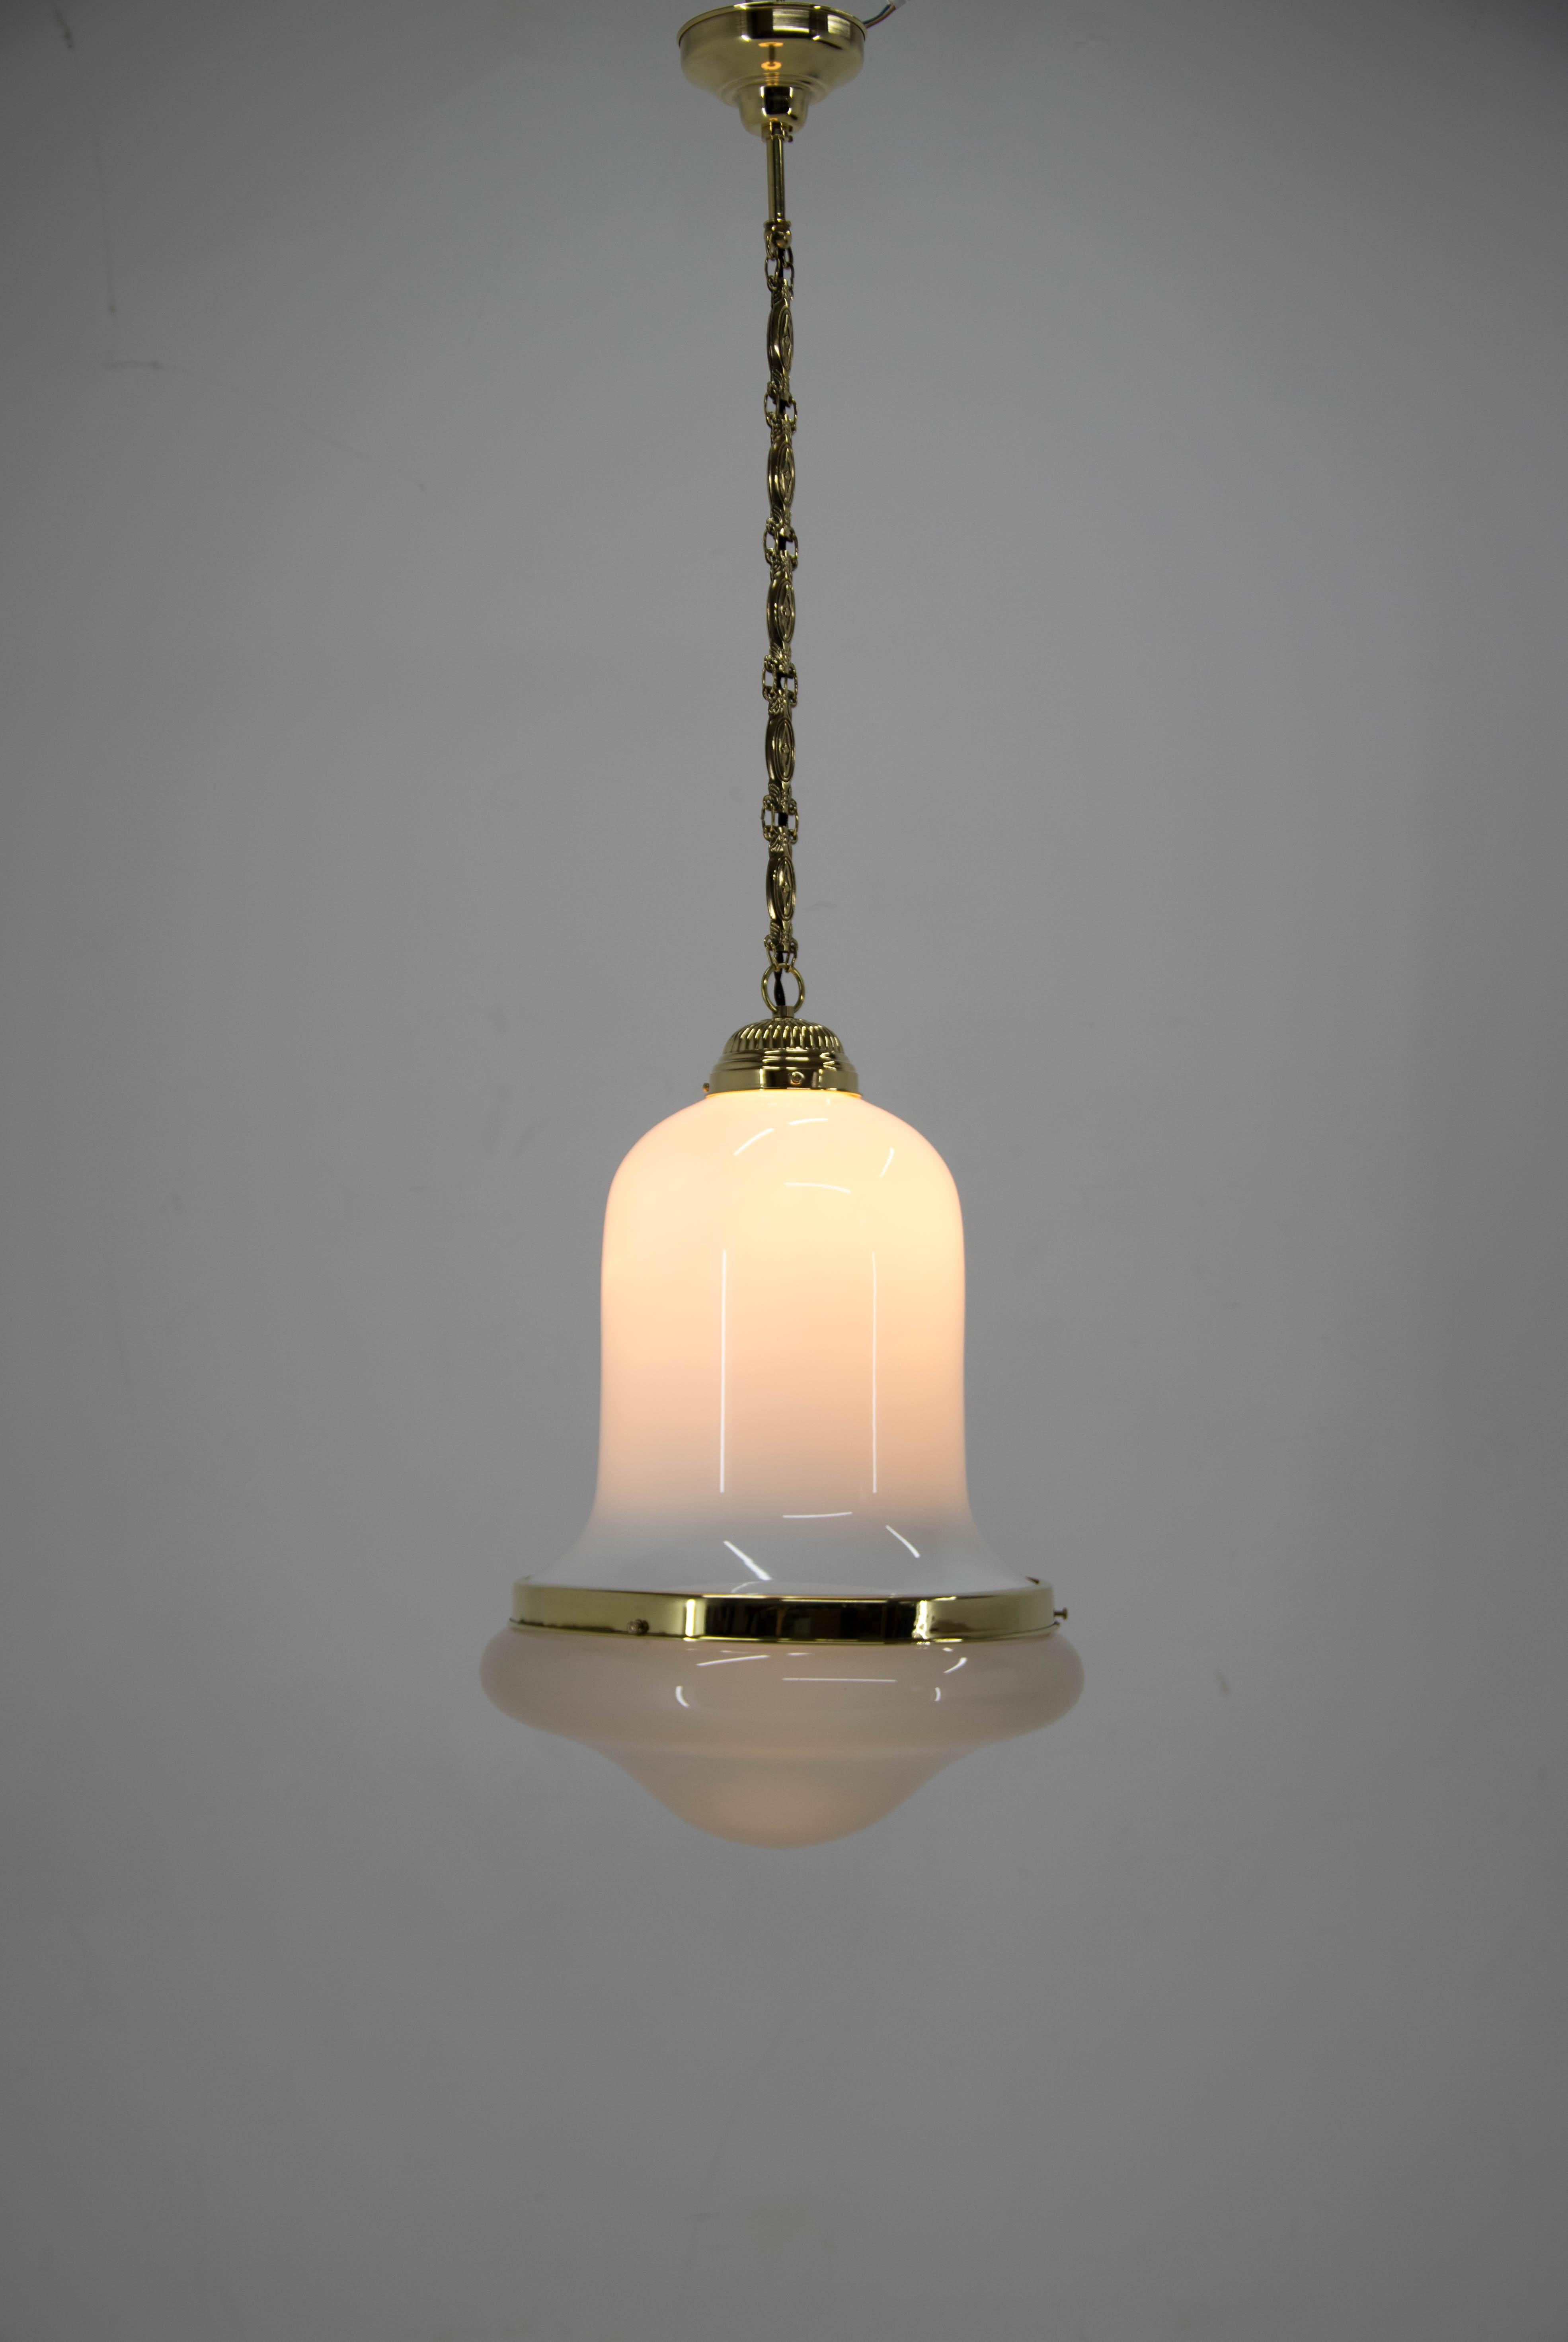 Carefully restored:
brass repolished, glass in perfect condition.
Rewired: 1x100W, E25-E27 bulb.
US wiring compatible.